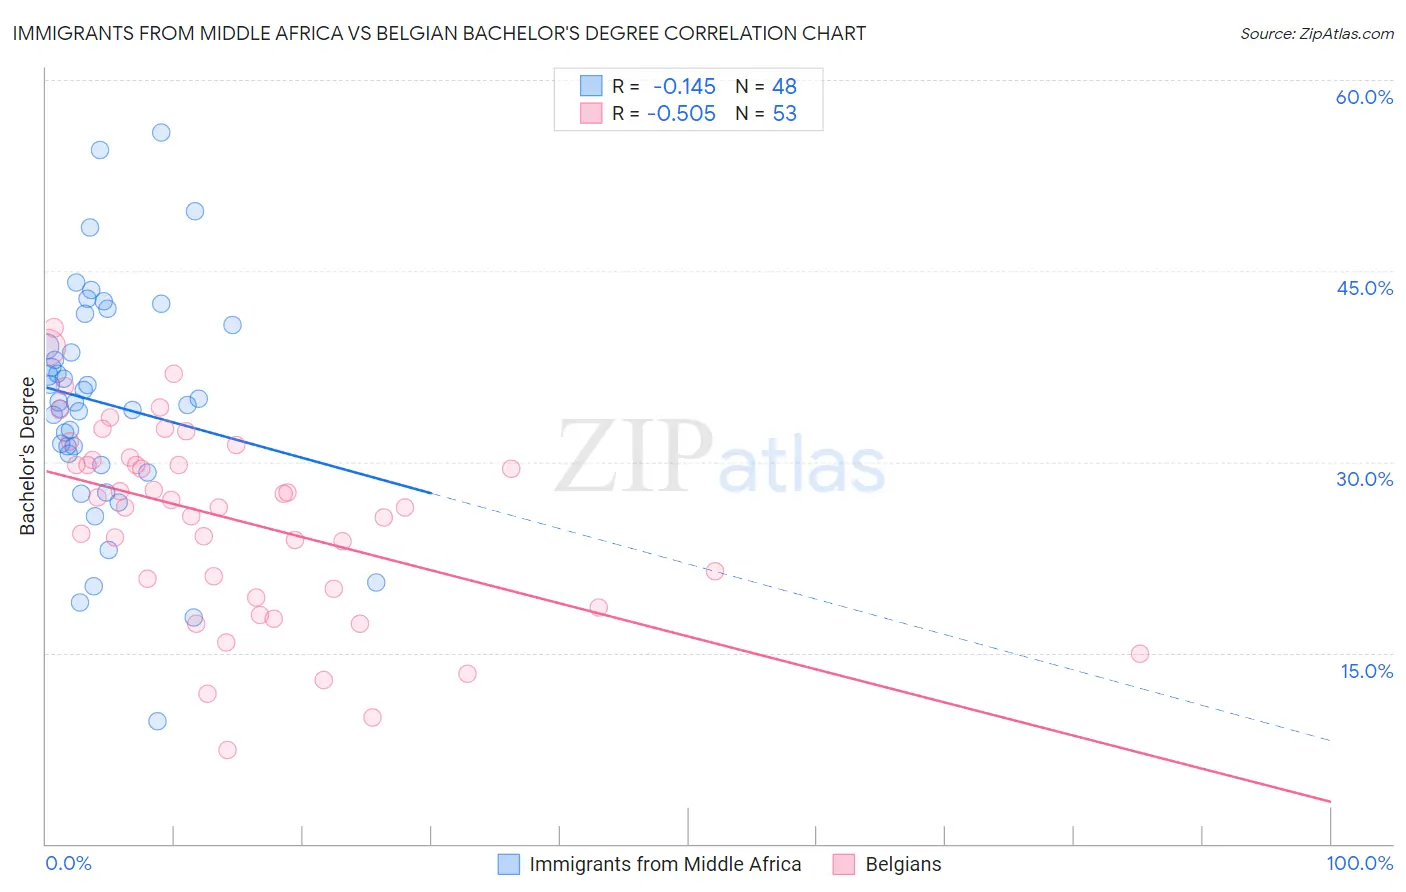 Immigrants from Middle Africa vs Belgian Bachelor's Degree